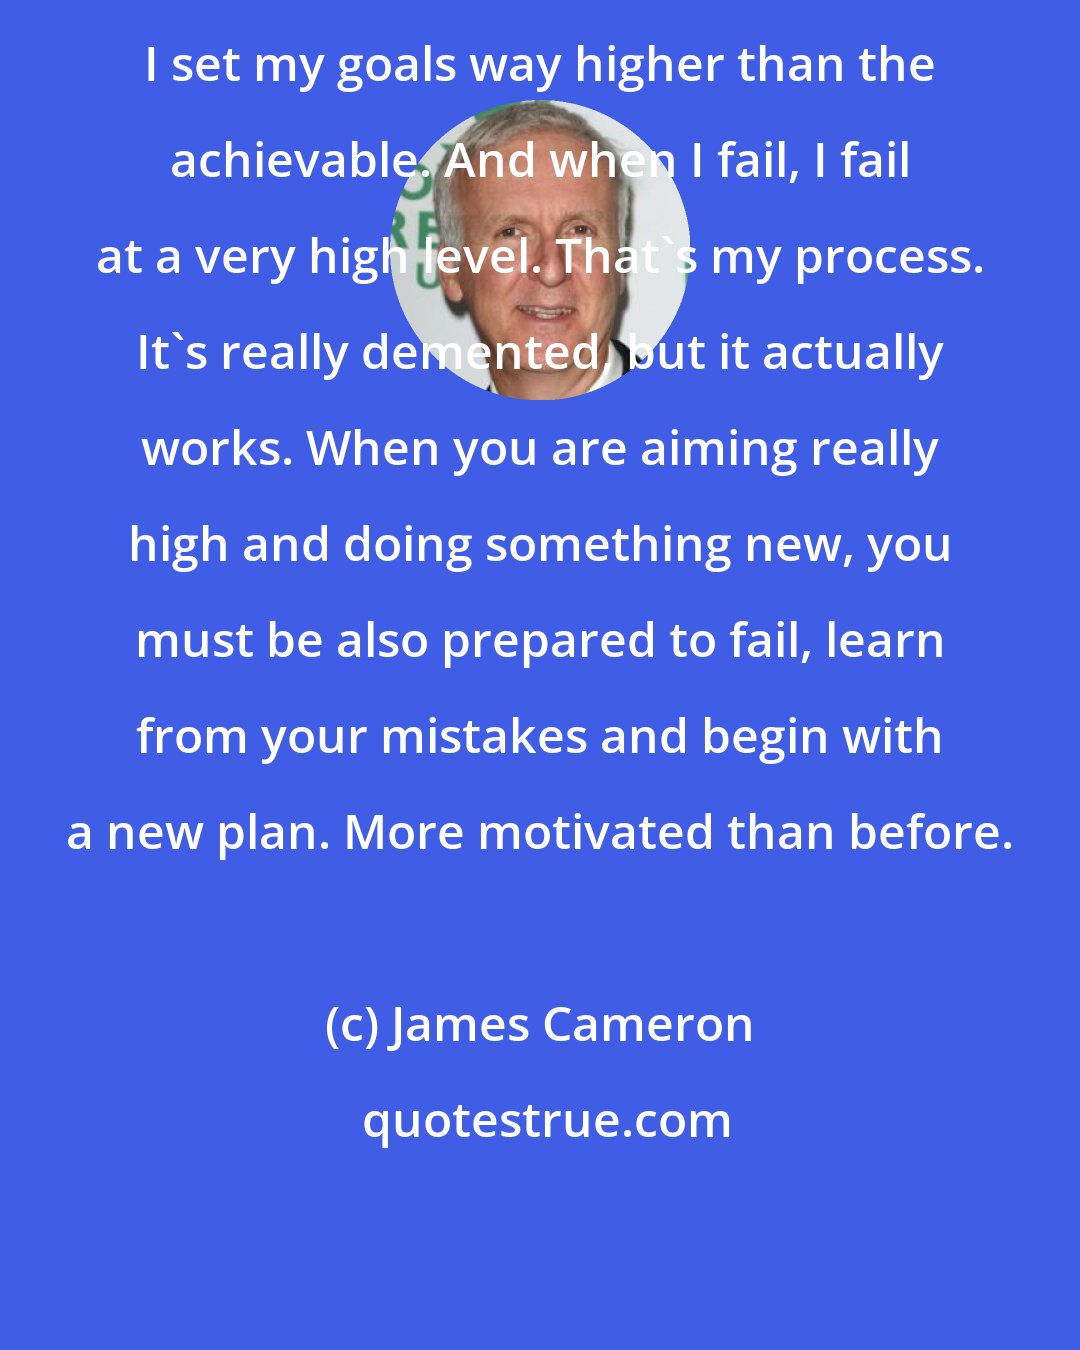 James Cameron: I set my goals way higher than the achievable. And when I fail, I fail at a very high level. That's my process. It's really demented, but it actually works. When you are aiming really high and doing something new, you must be also prepared to fail, learn from your mistakes and begin with a new plan. More motivated than before.